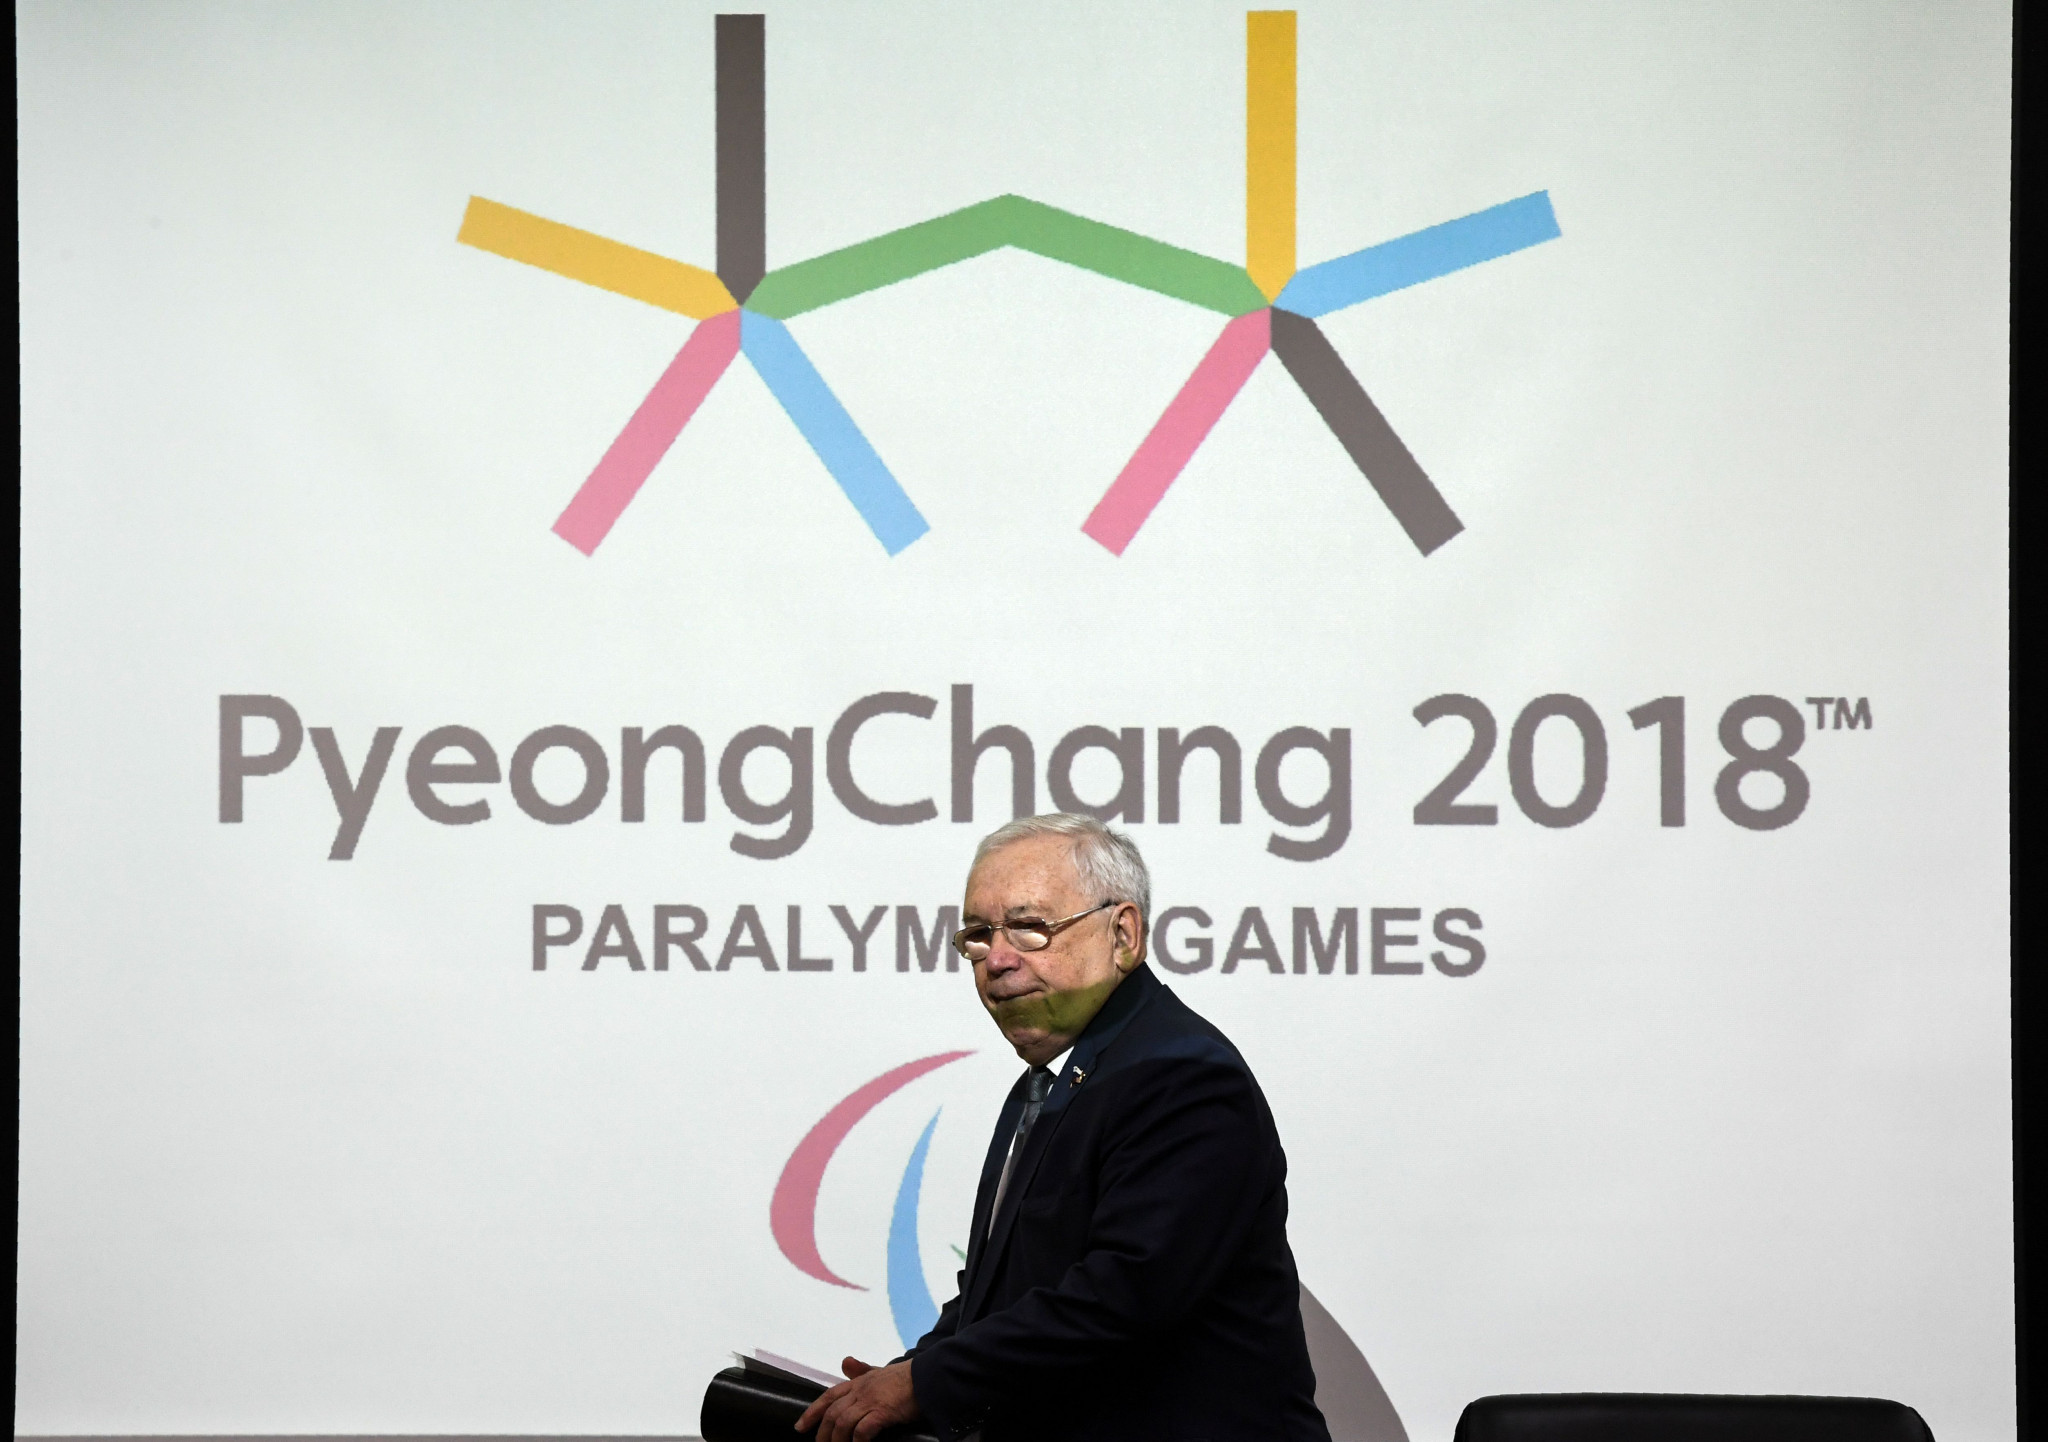 Russia submit list of proposed athletes on neutral team for Pyeongchang 2018 Winter Paralympics